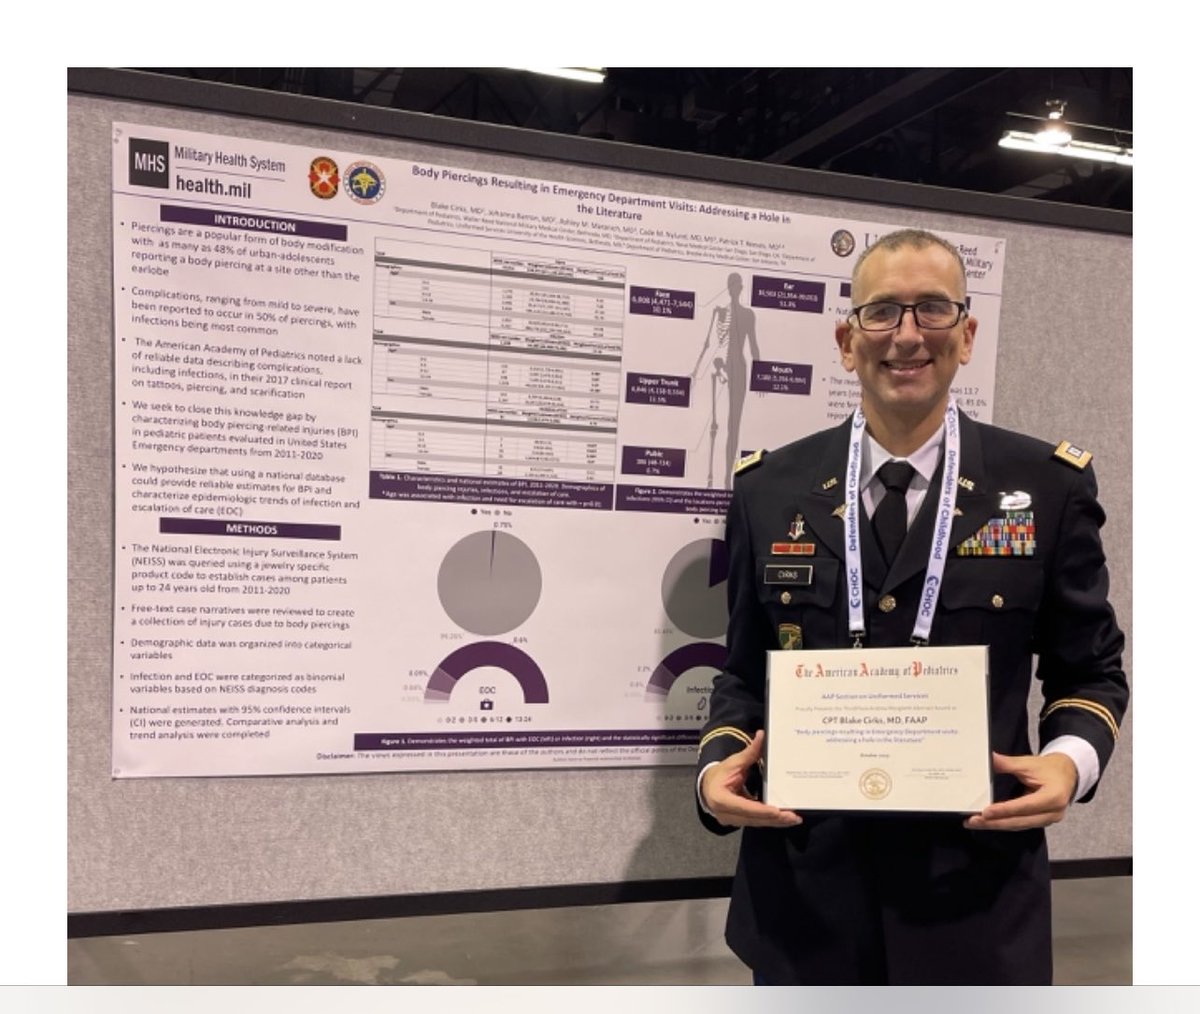 Congratulations to ⁦@BlakeCirks⁩ and our team ⁦@USUhealthsci⁩ and ⁦@NCCPeds⁩. Dr Cirks won our team Bronze for the Andrew Margileth award ⁦@AAPexperience⁩ for our “Body Piercing Injuries presenting to EDs” project. Might be time to update those guidelines.